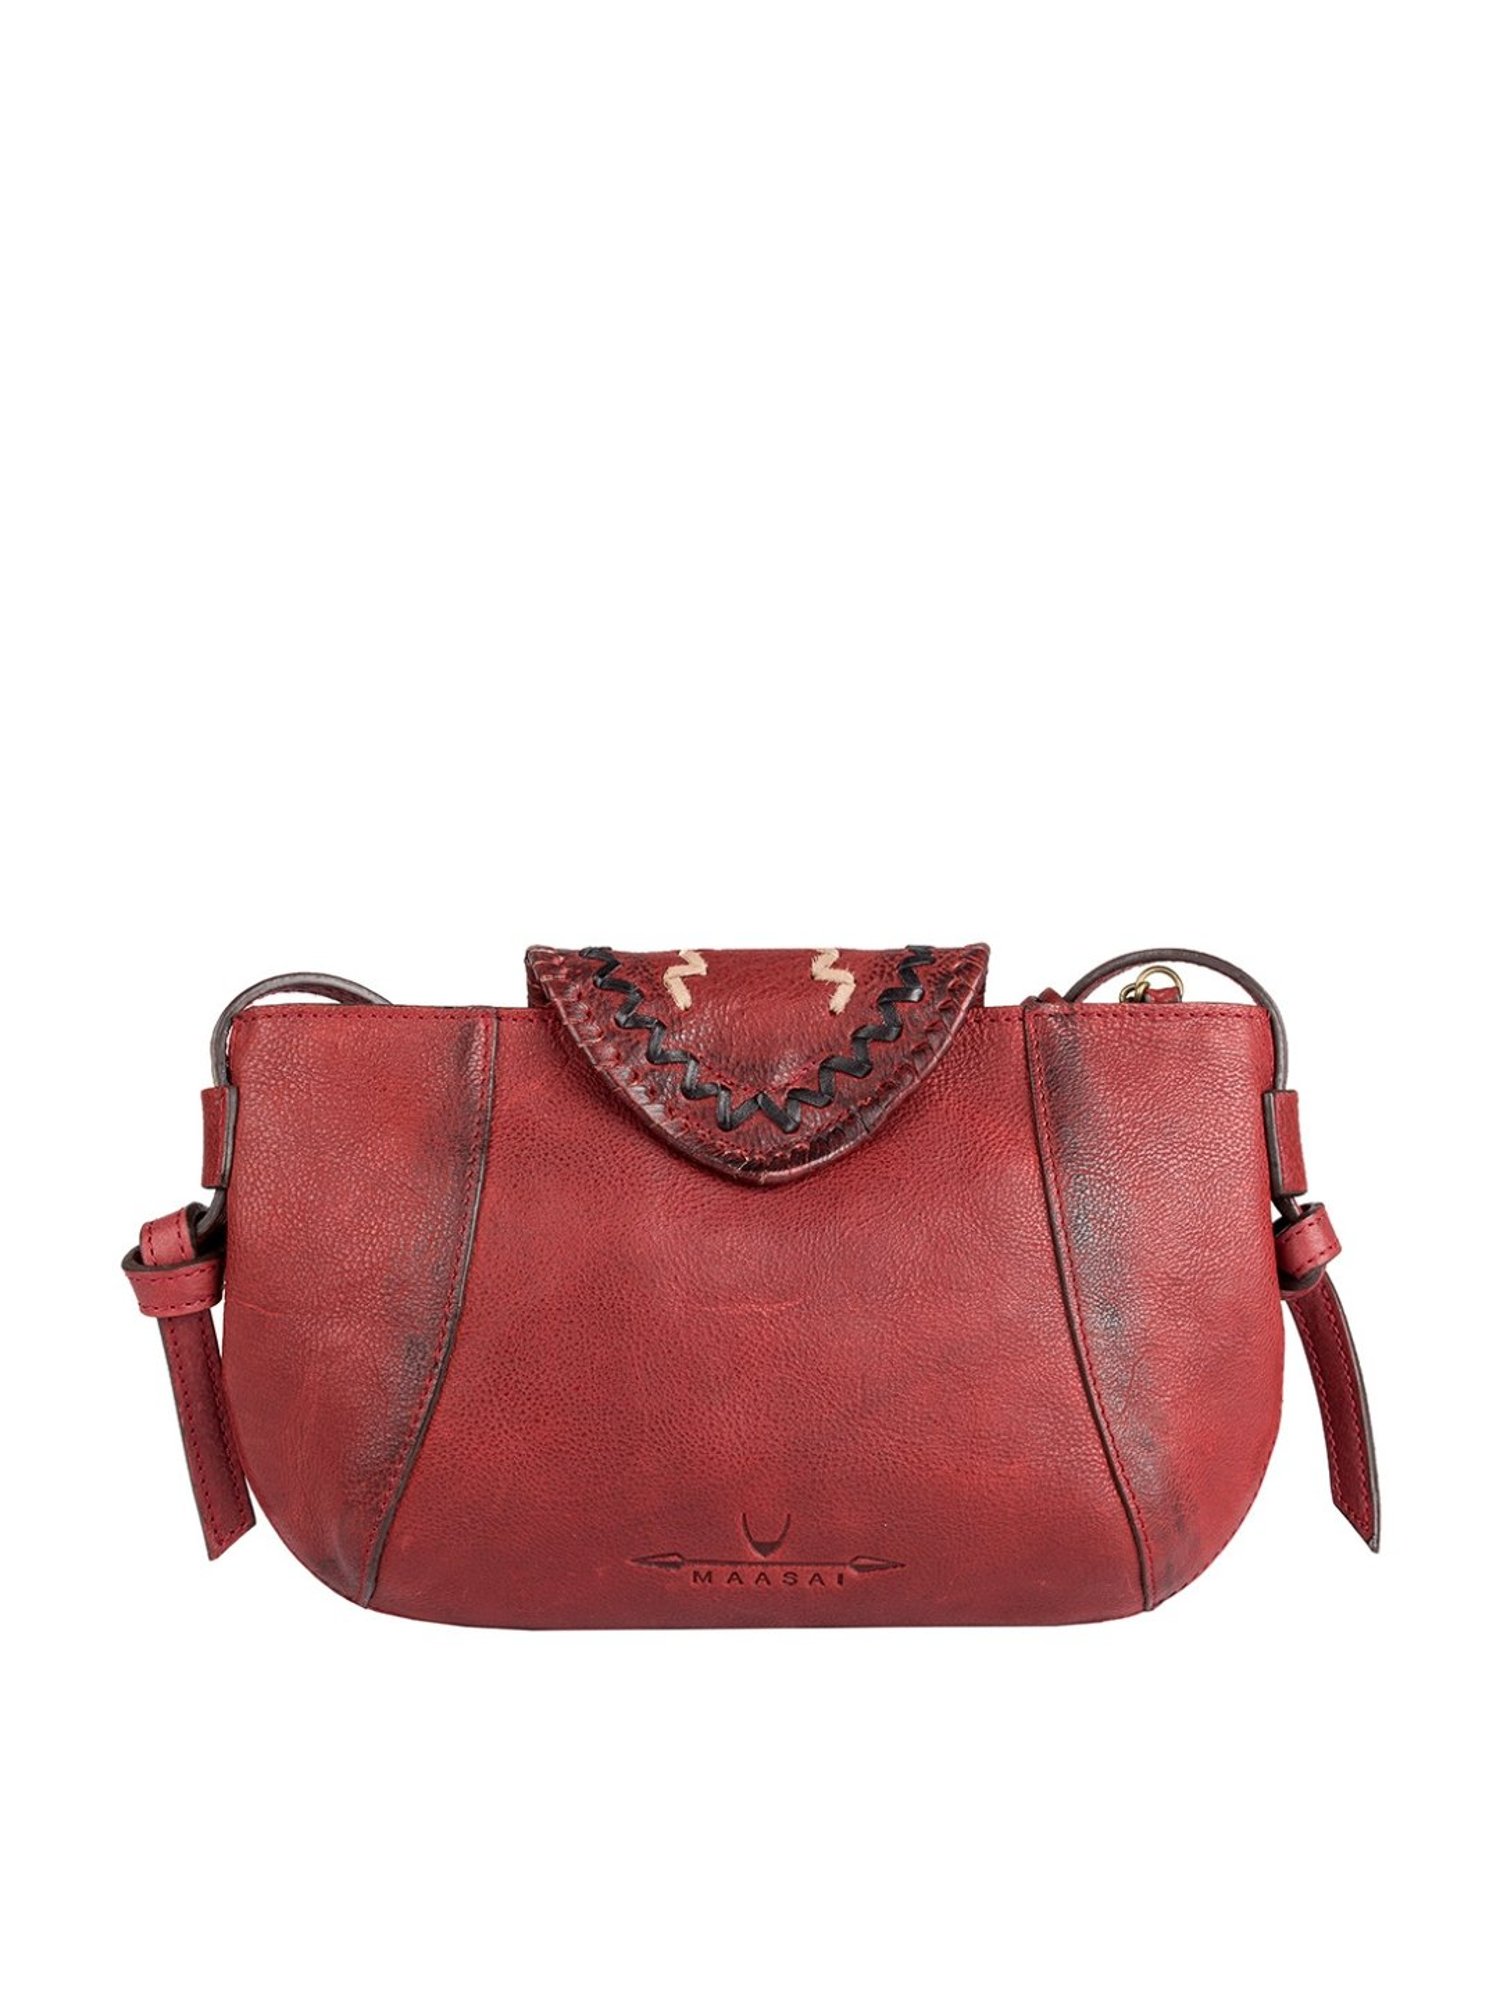 Red Leather Crossbody Bags | The Leather Satchel Co.